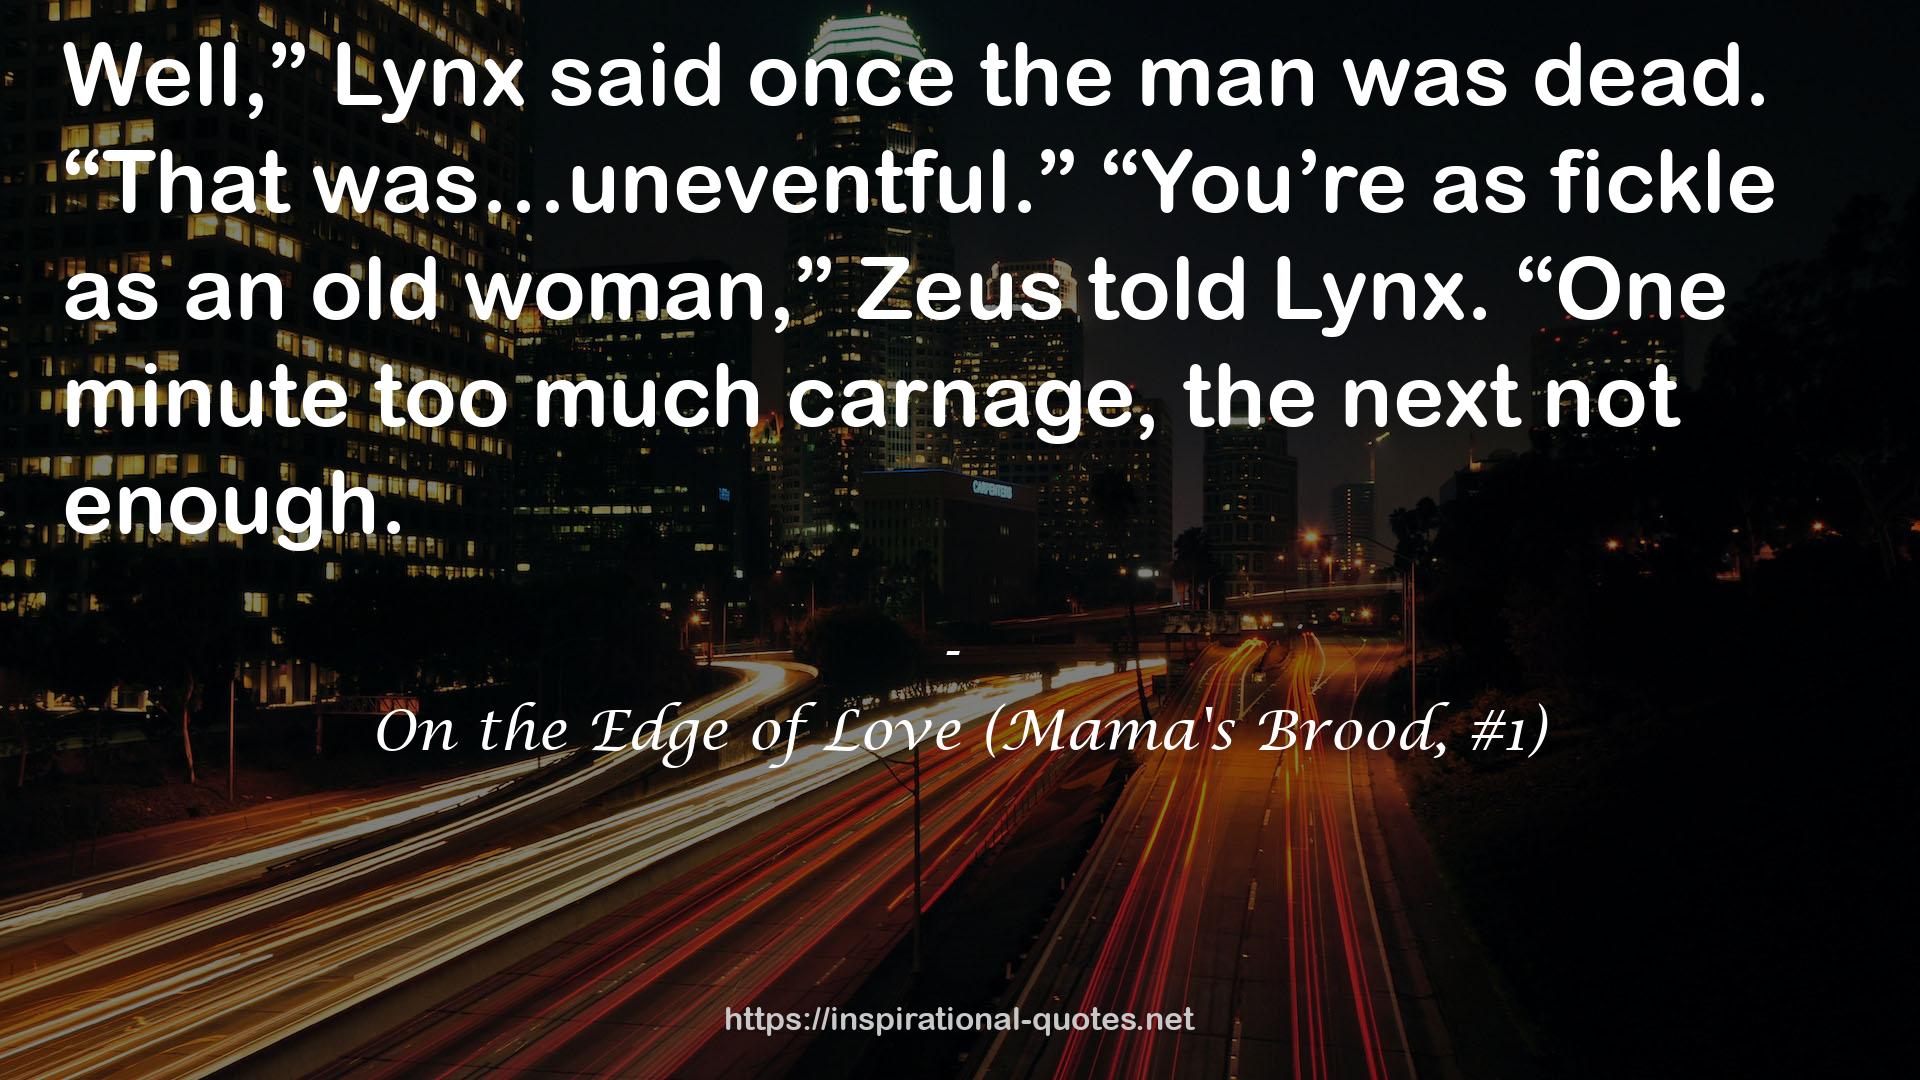 On the Edge of Love (Mama's Brood, #1) QUOTES